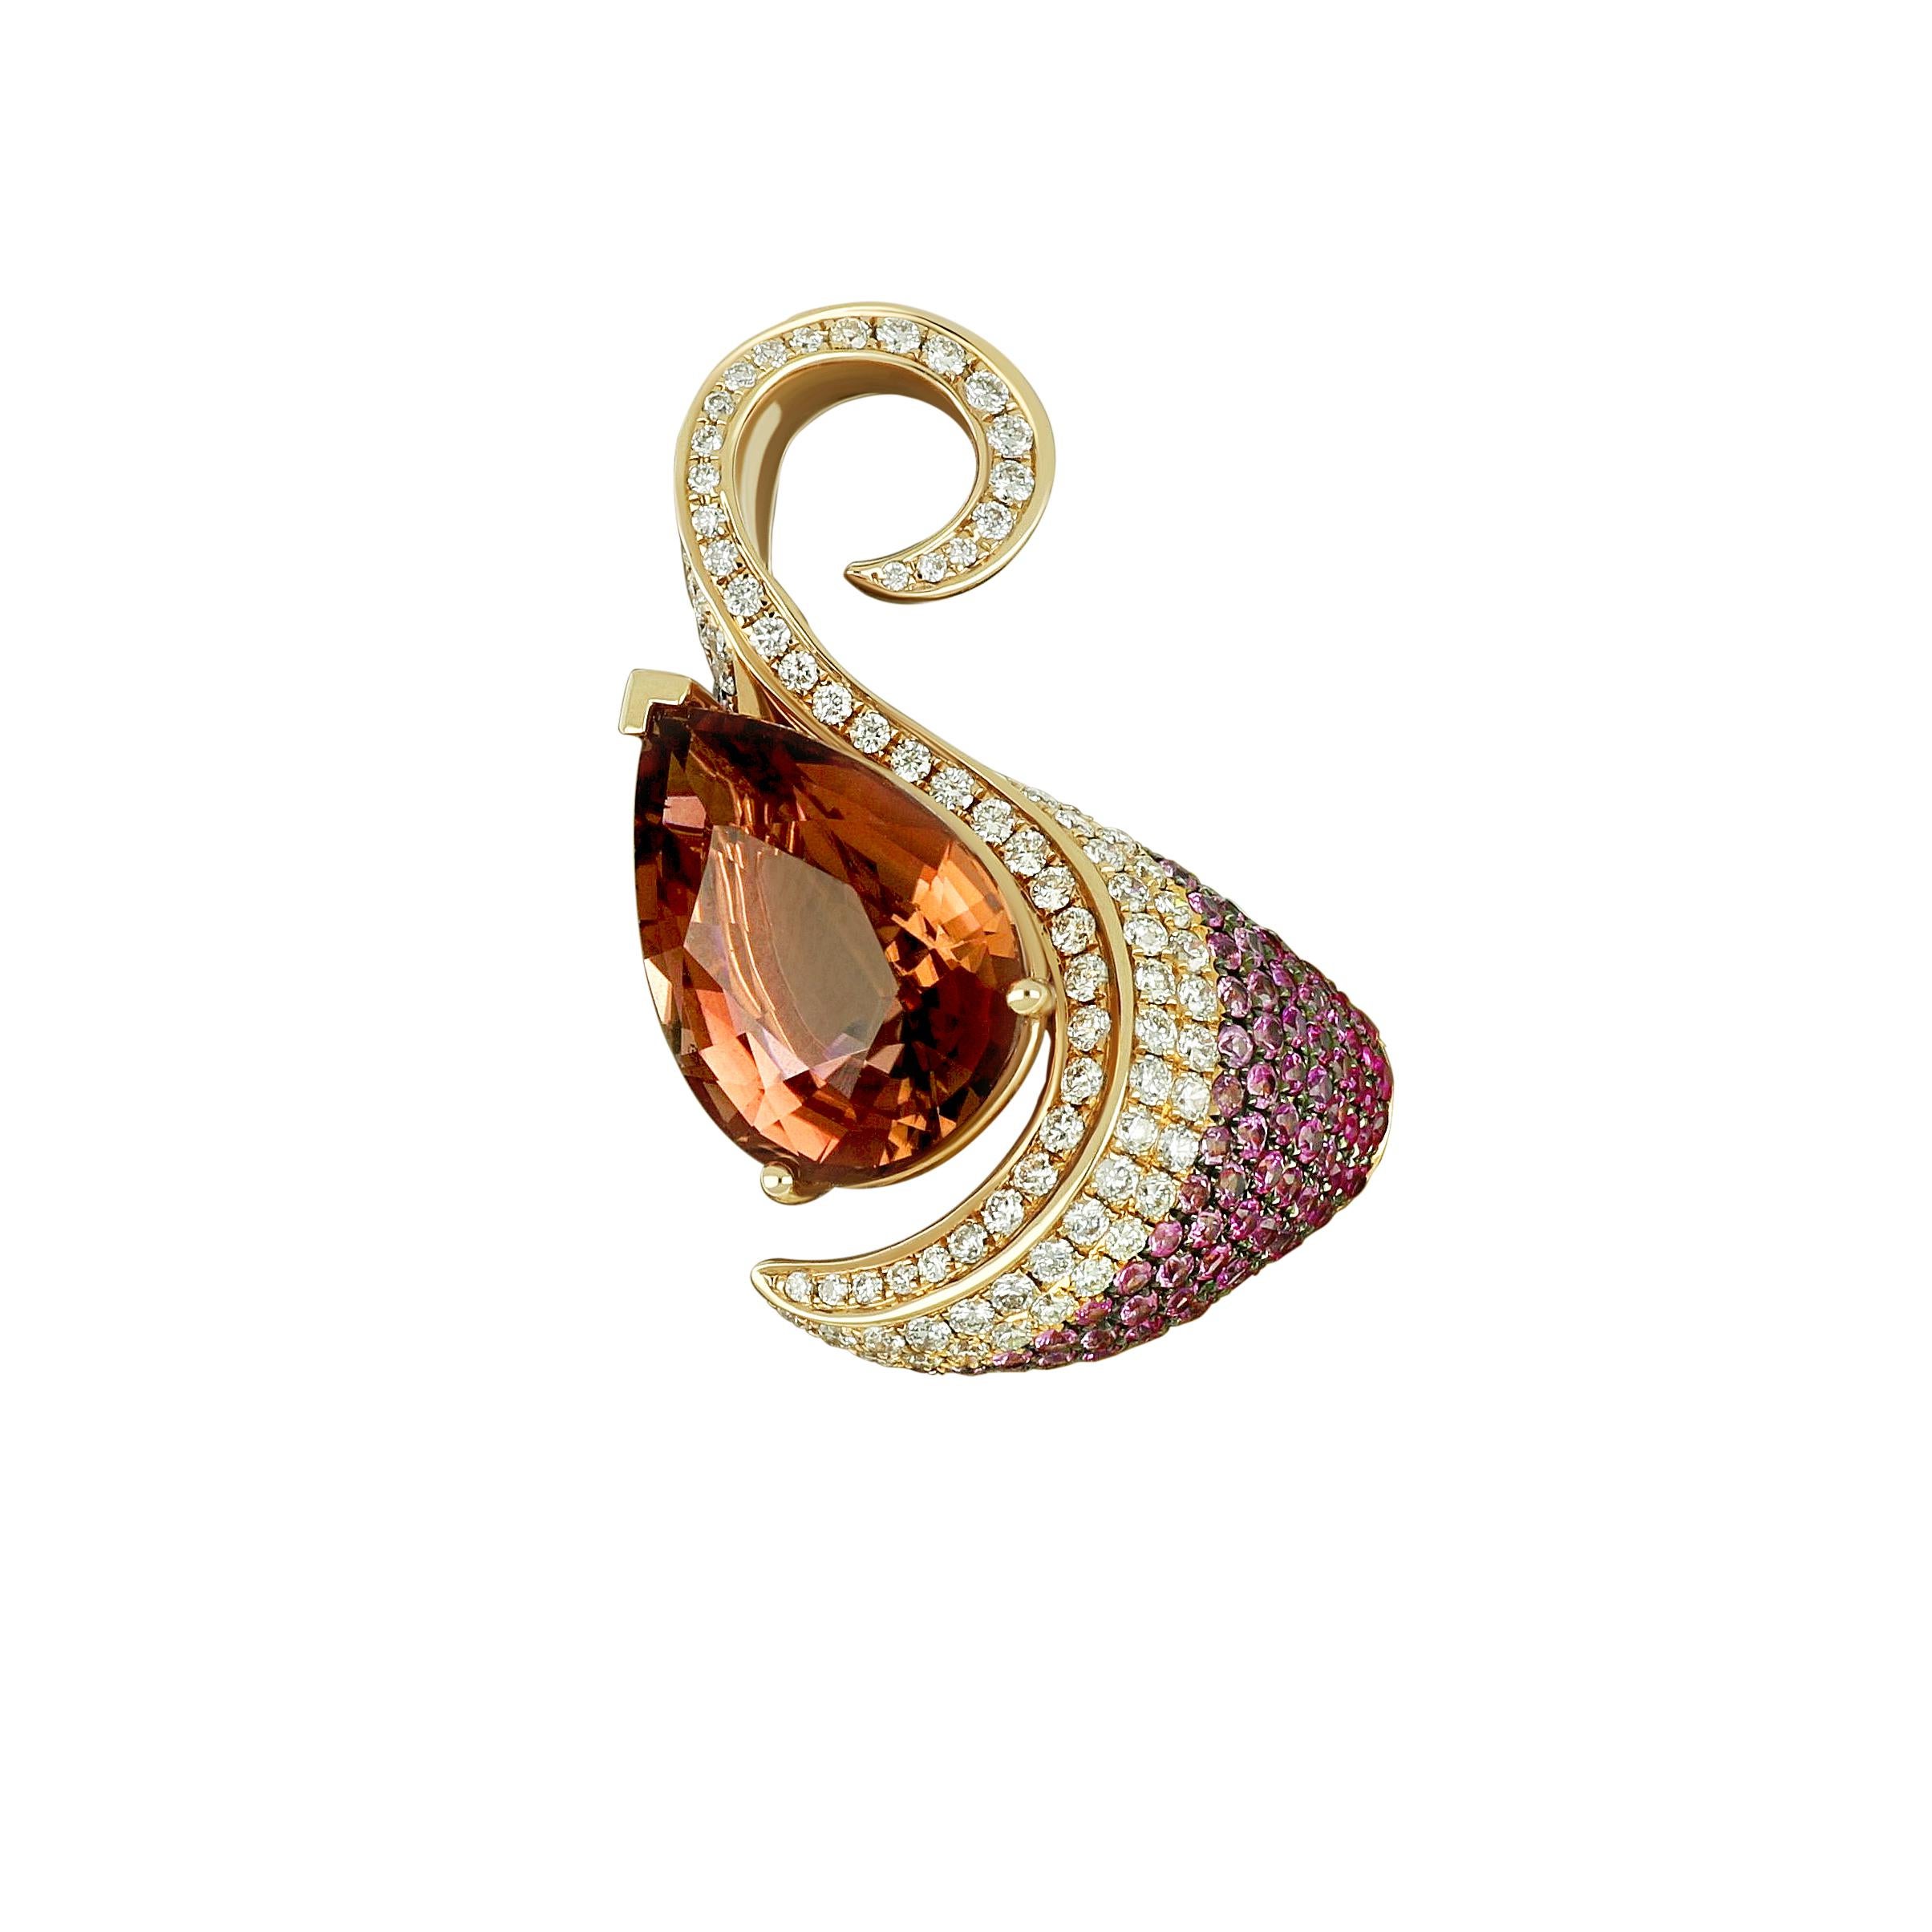 This rose gold ring is a captivating blend of elegance and allure. At its centre lies a dazzling round-cut citrine, complemented by a halo of sparkling round-cut diamonds. Along the band, round-cut amethyst stones add a touch of rich purple